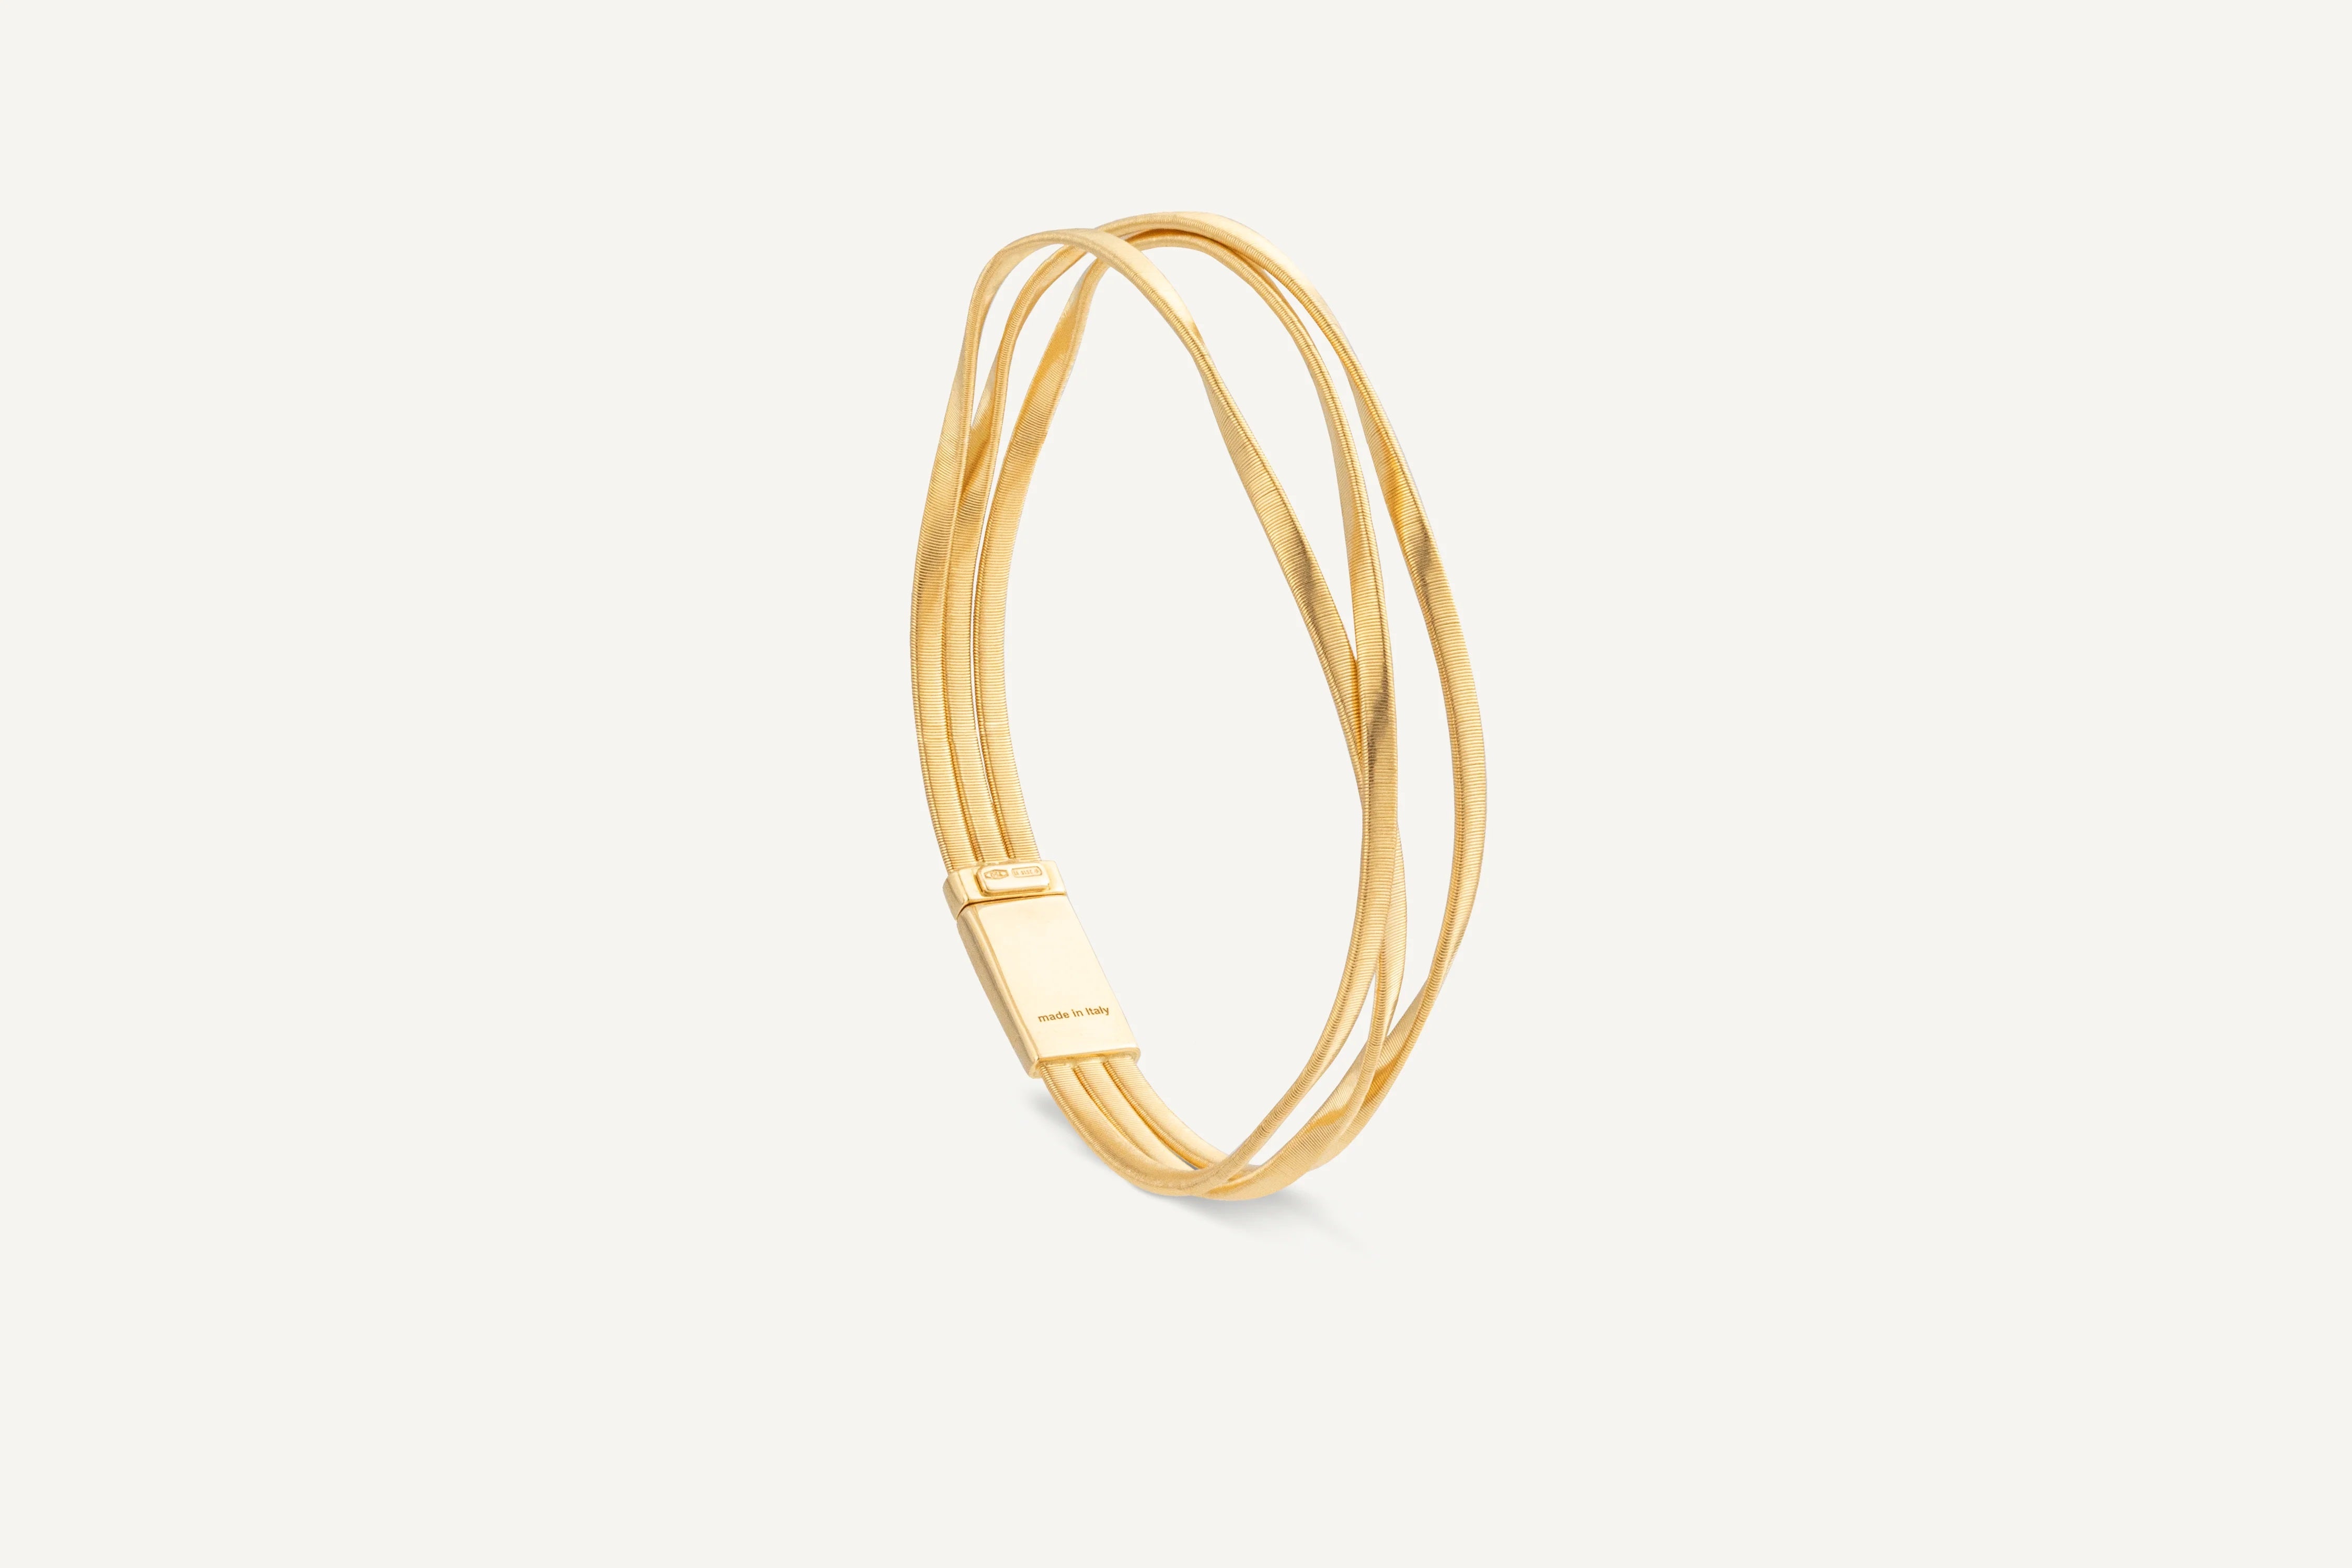 18K YELLOW GOLD 3-STRAND COIL BRACELET FROM THE MARRAKECH COLLECTION